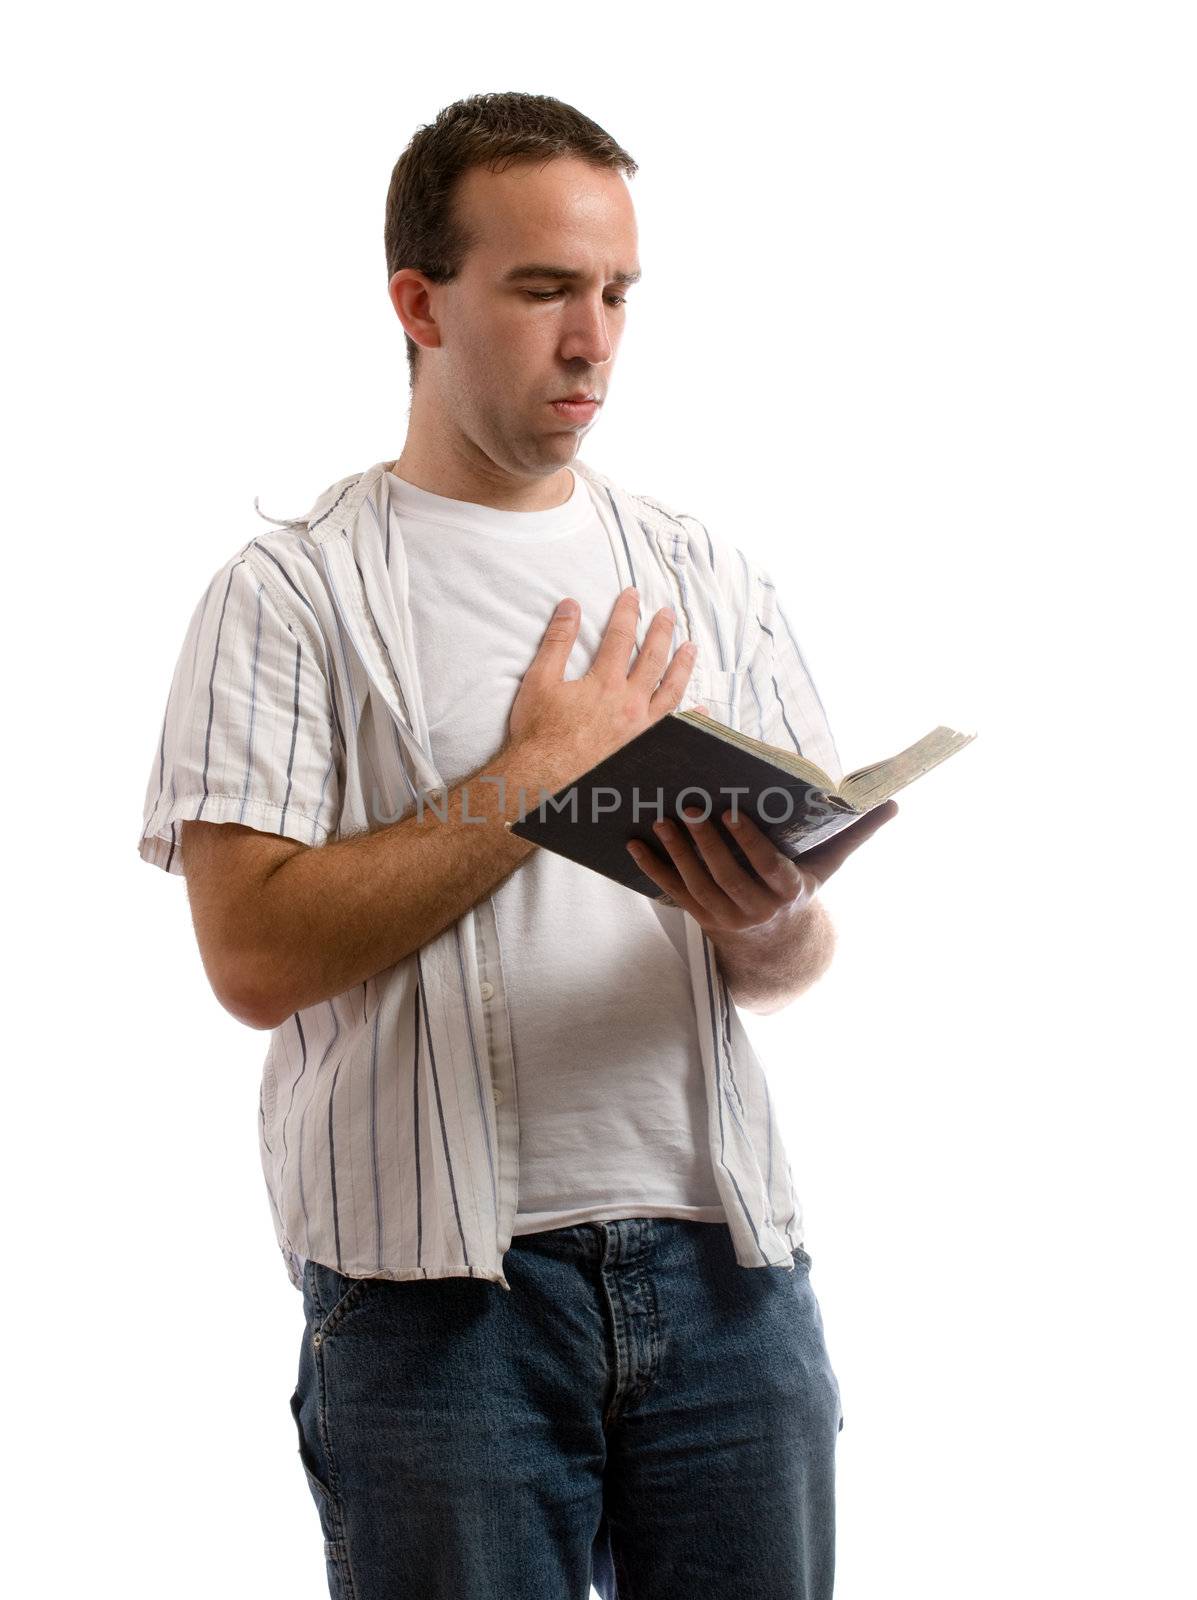 A young man holding an old bible is saying a prayer, isolated against a white background